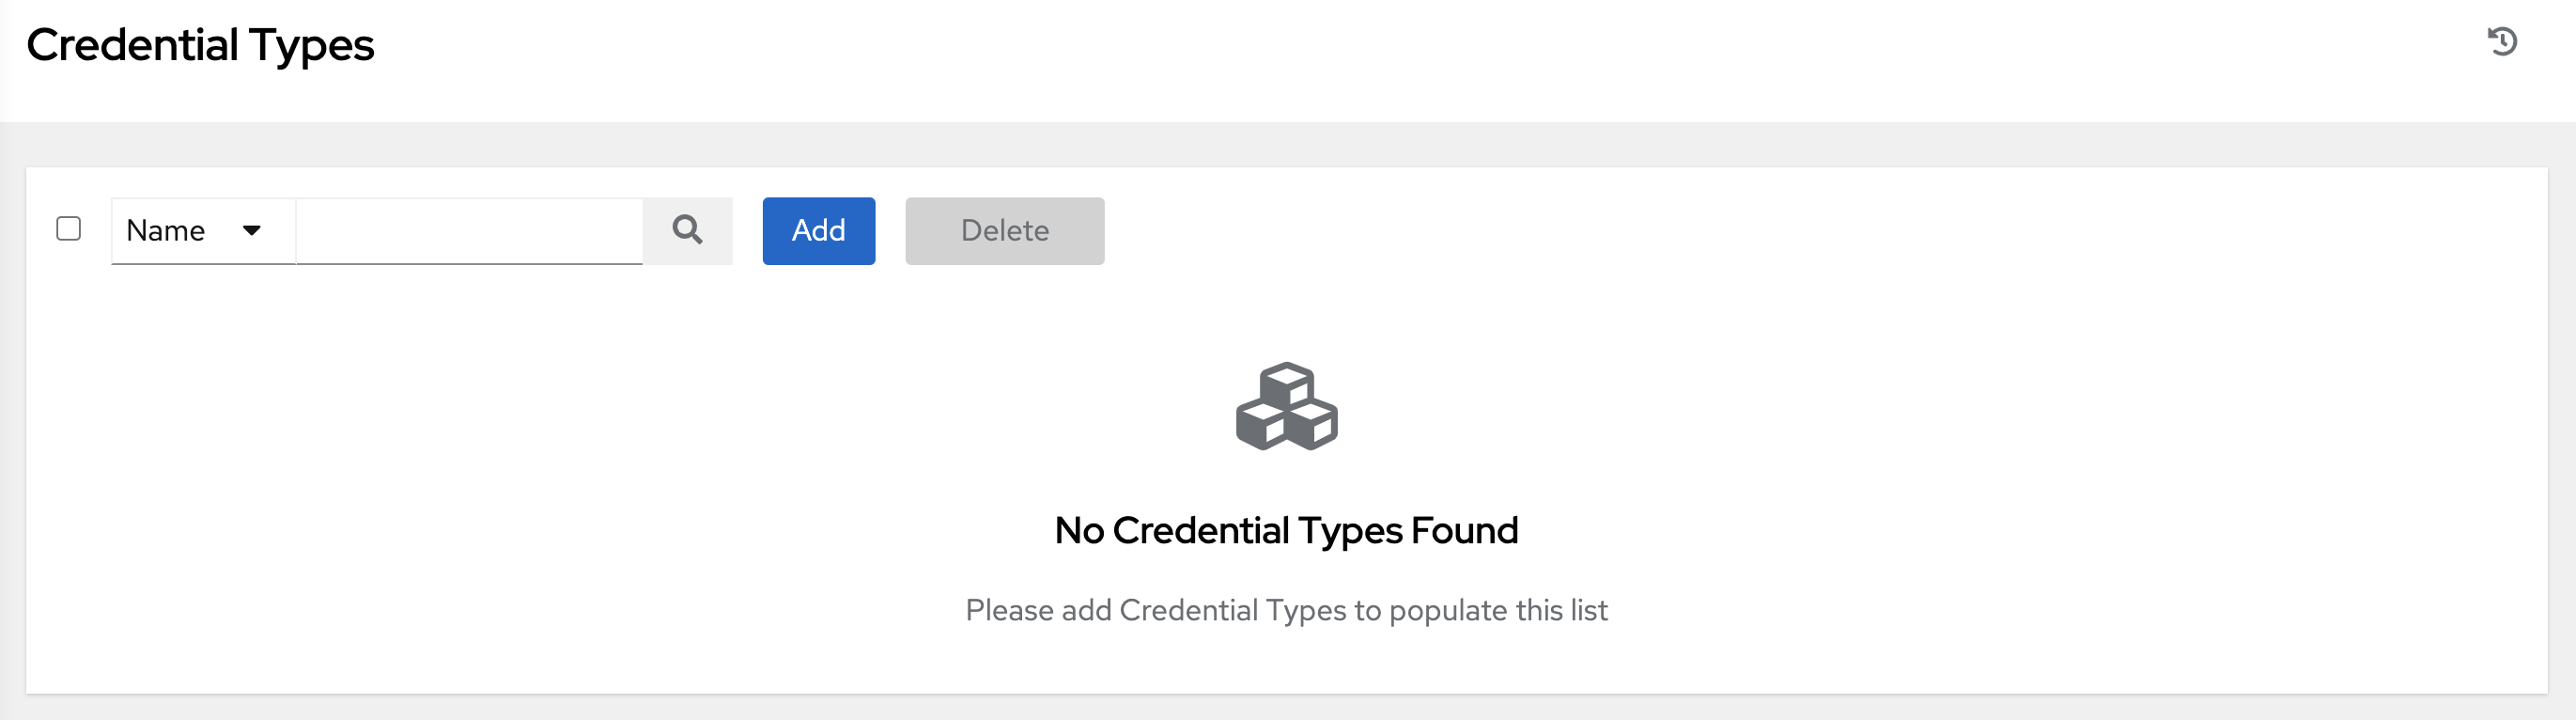 Credential Types - home empty